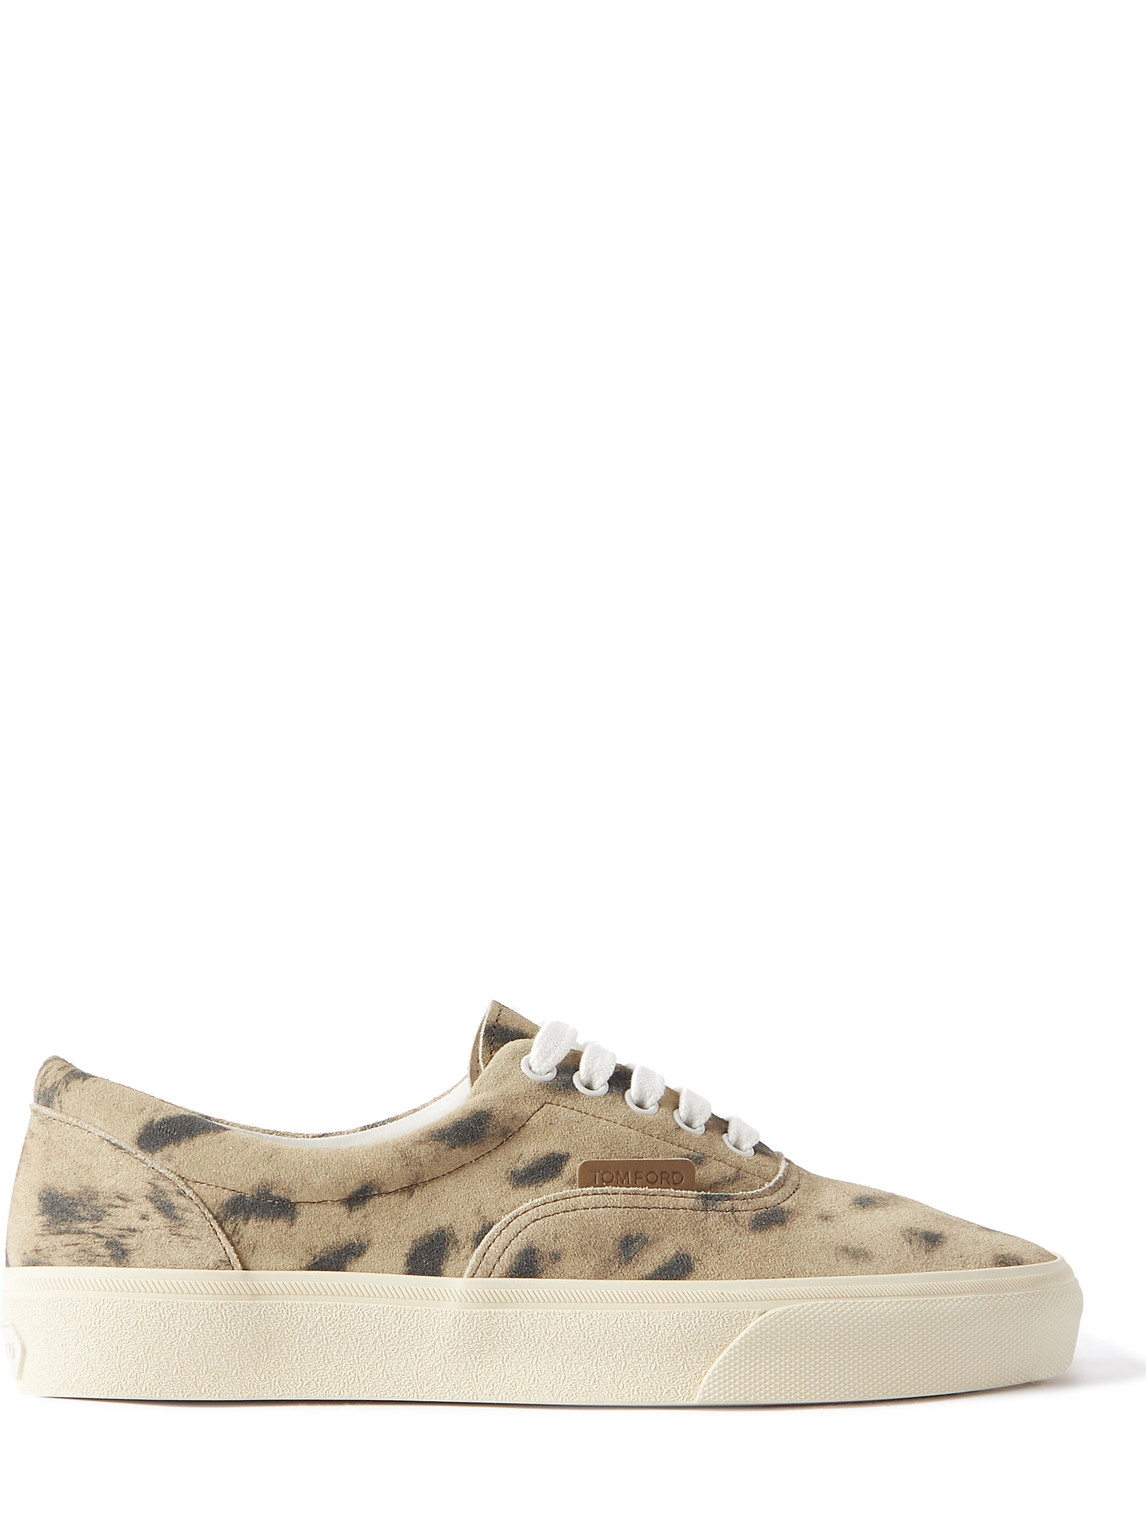 Tom Ford Jude Cheetah-print Suede Sneakers In Neutrals